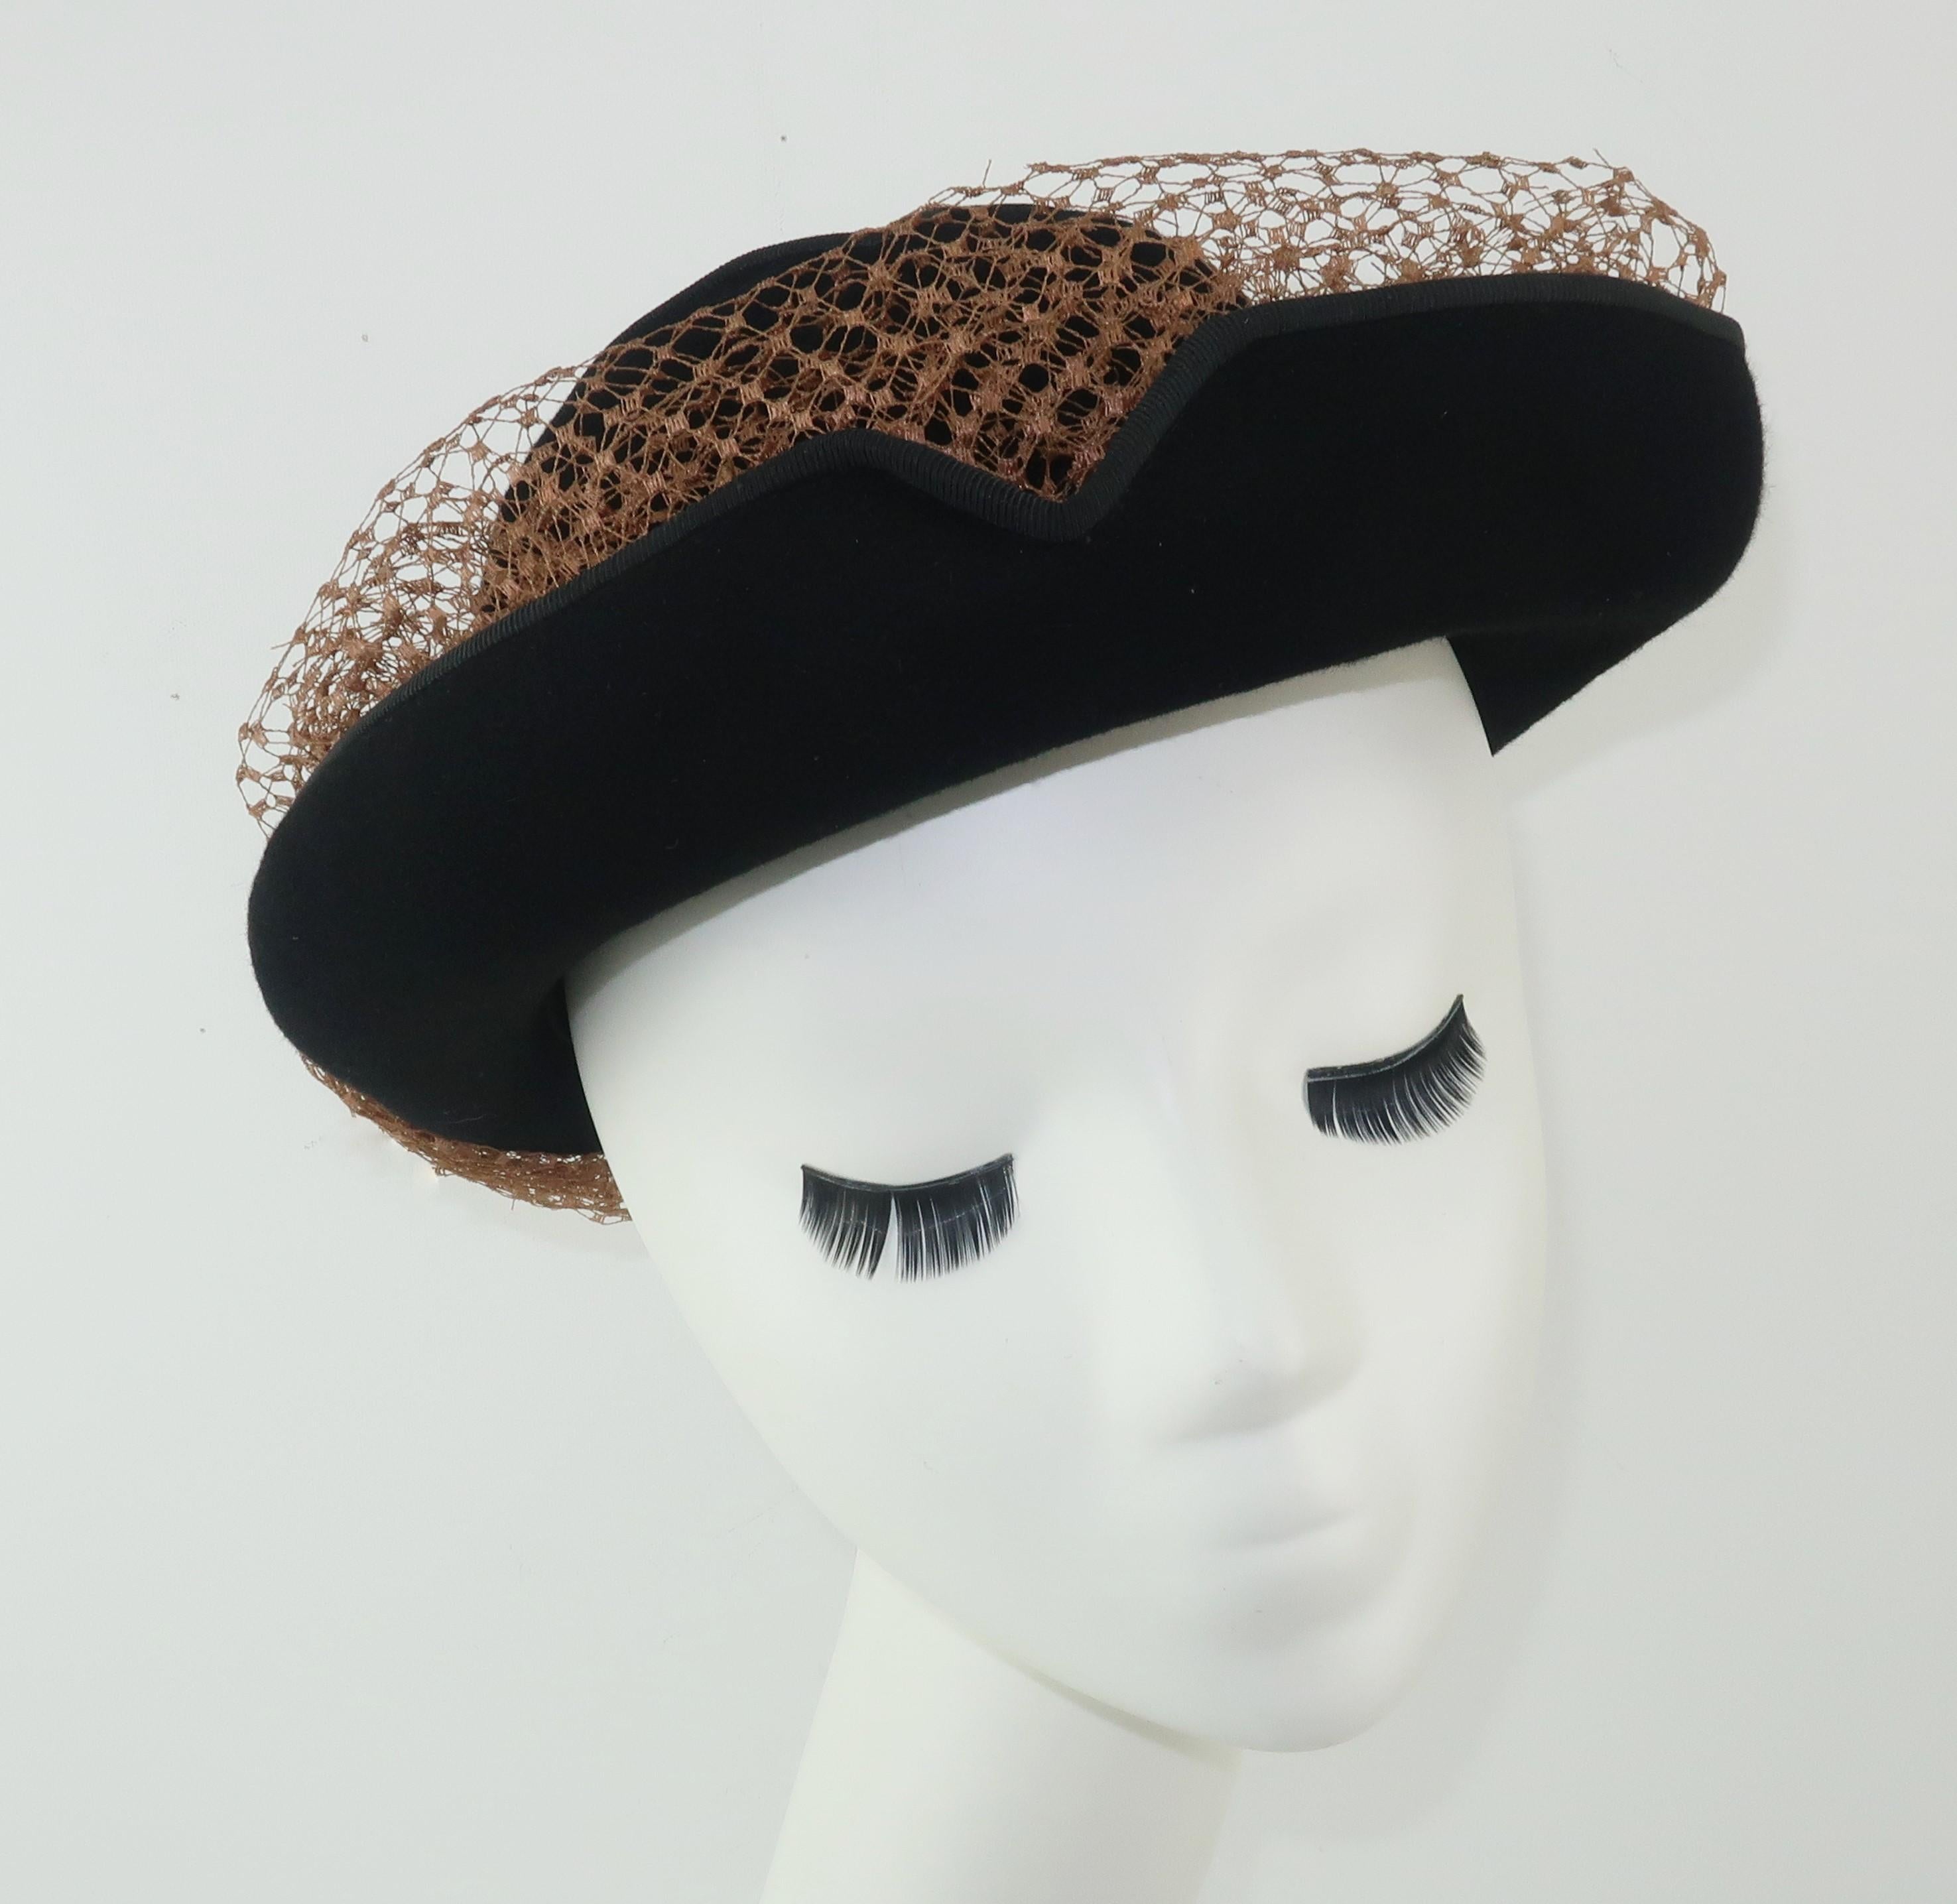 A stylish 1940’s Miriam Lewis black wool felt hat with a vented crown, grosgrain trimmed brim and contrasting camel color netting with bow.  The unique rolled brim is nicely detailed with v-shaped cuts that add visual interest and serve as a channel